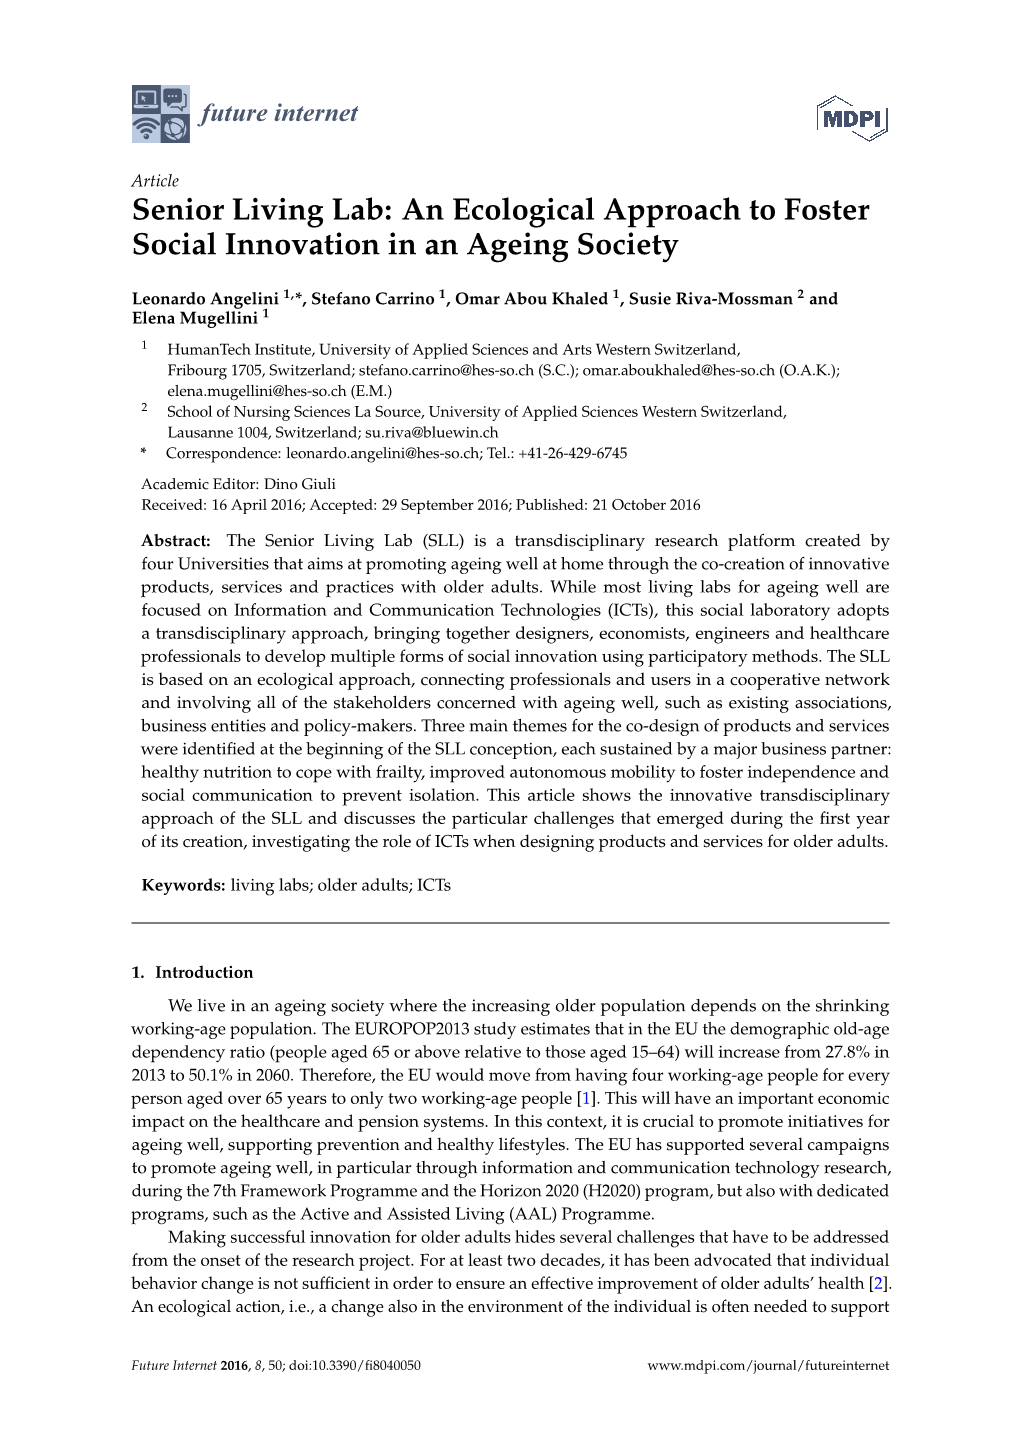 Senior Living Lab: an Ecological Approach to Foster Social Innovation in an Ageing Society